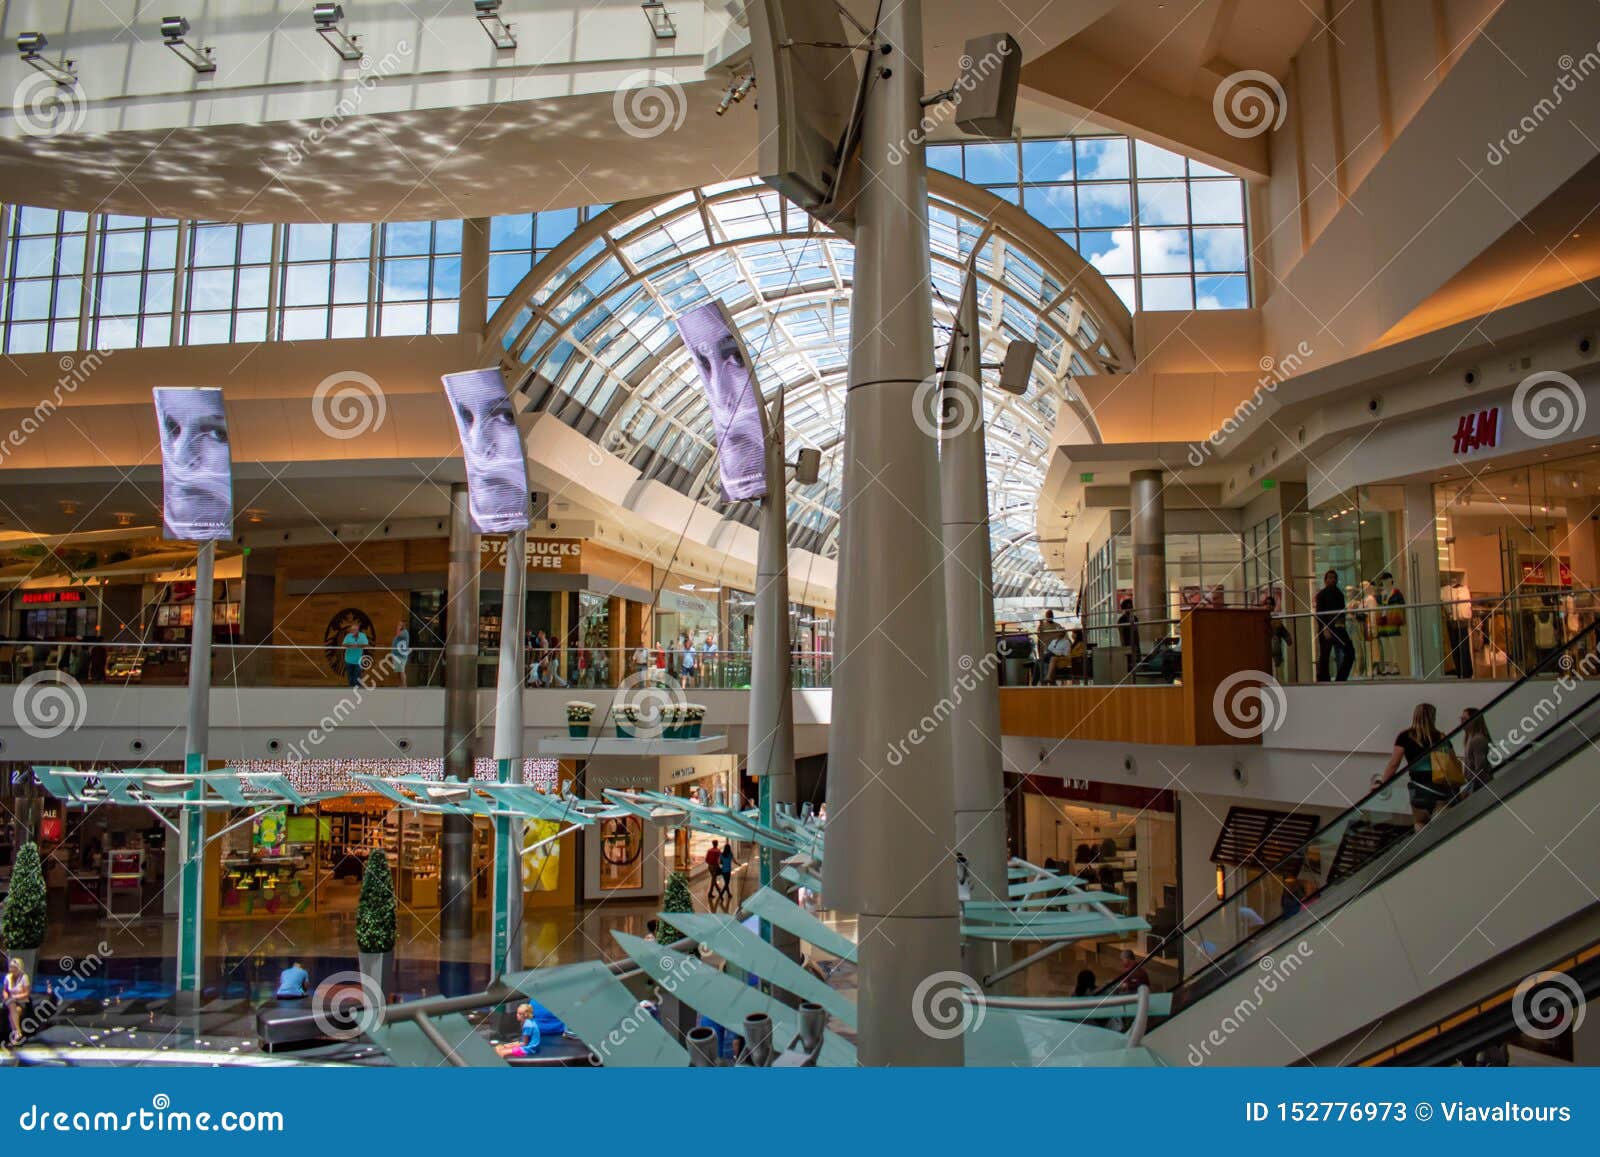 The Florida Mall in Orlando - Central FL's Largest Shopping Center